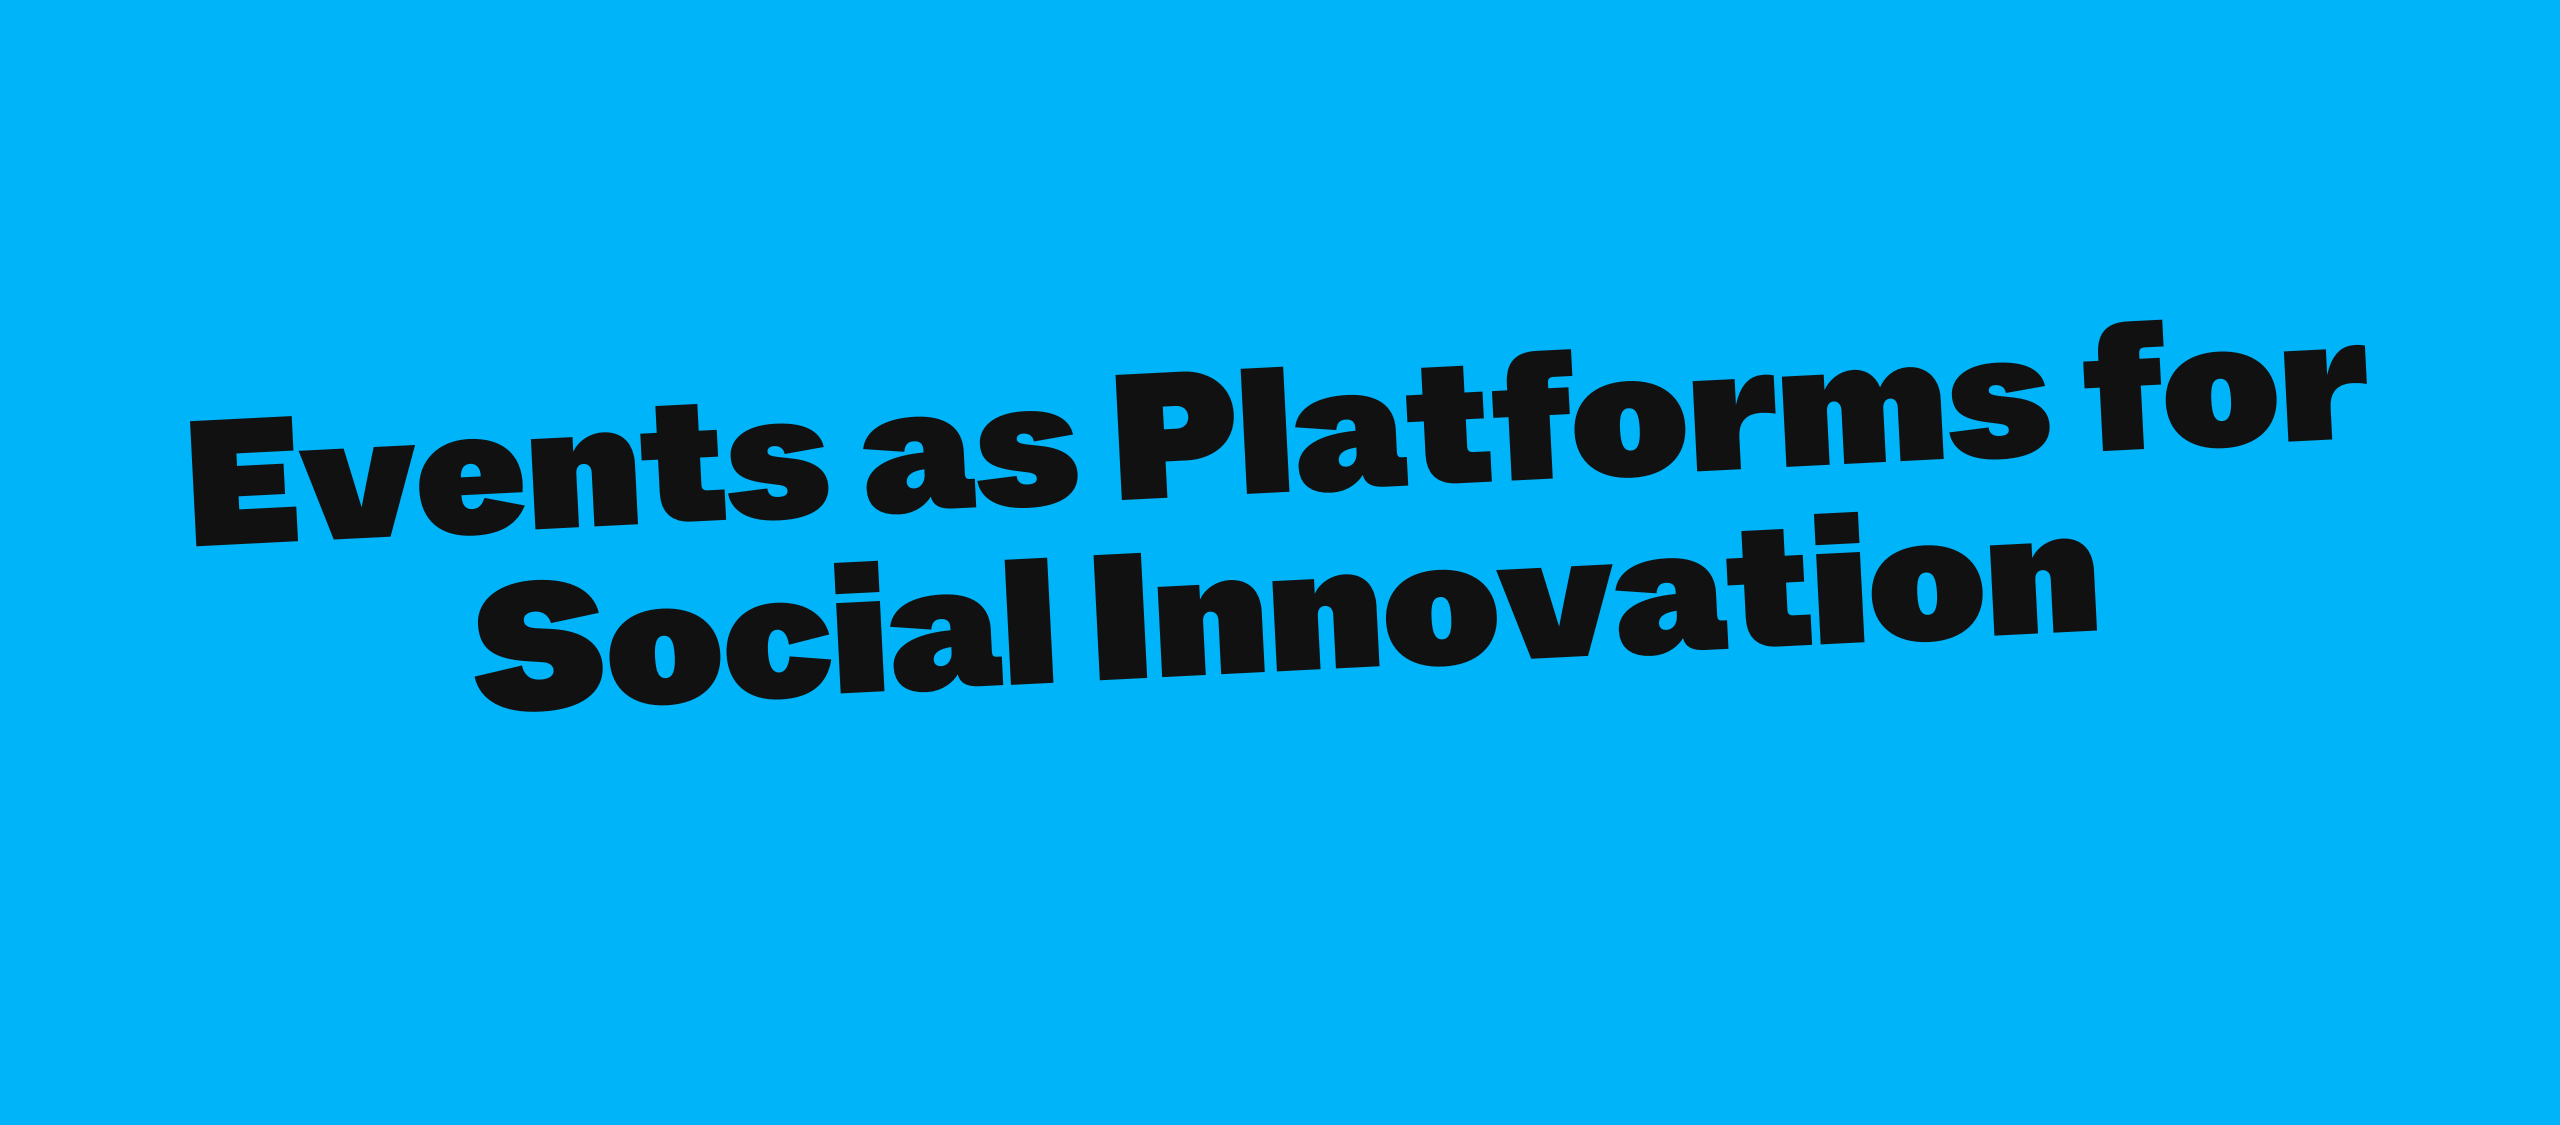 Events as Platforms for Social Innovation